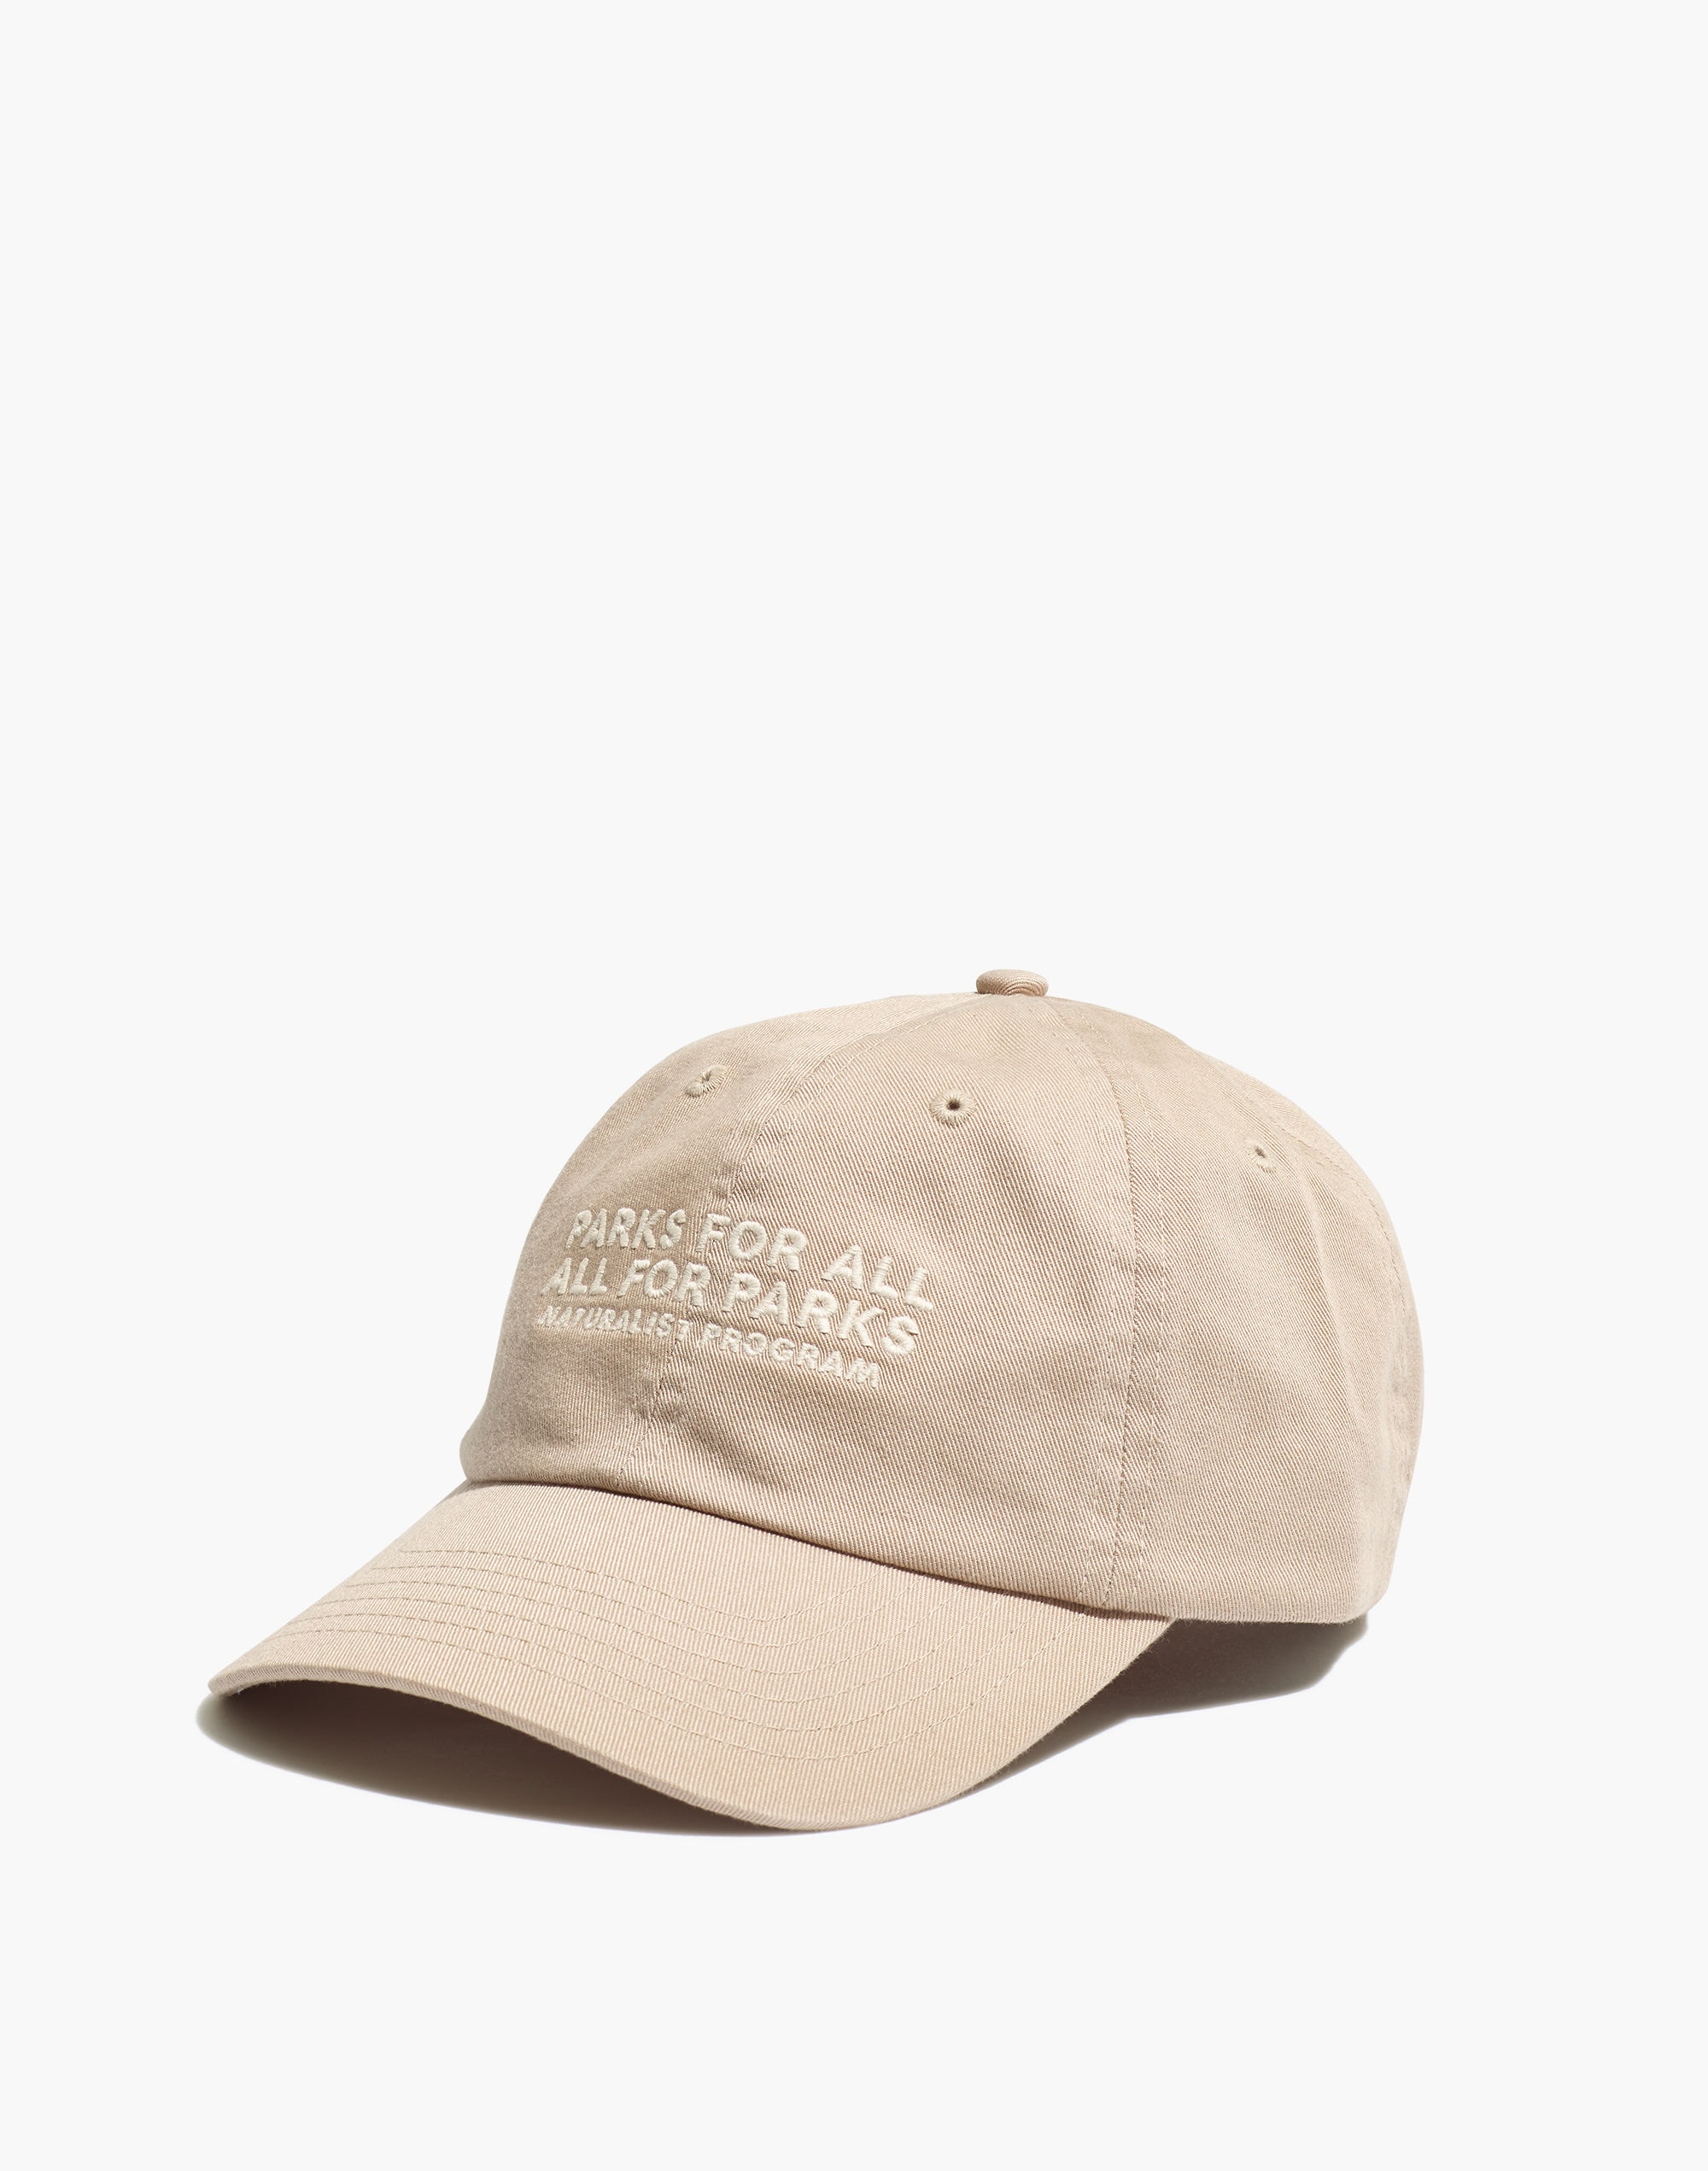 Madewell x Parks Project Naturalist Program Embroidered Baseball Cap